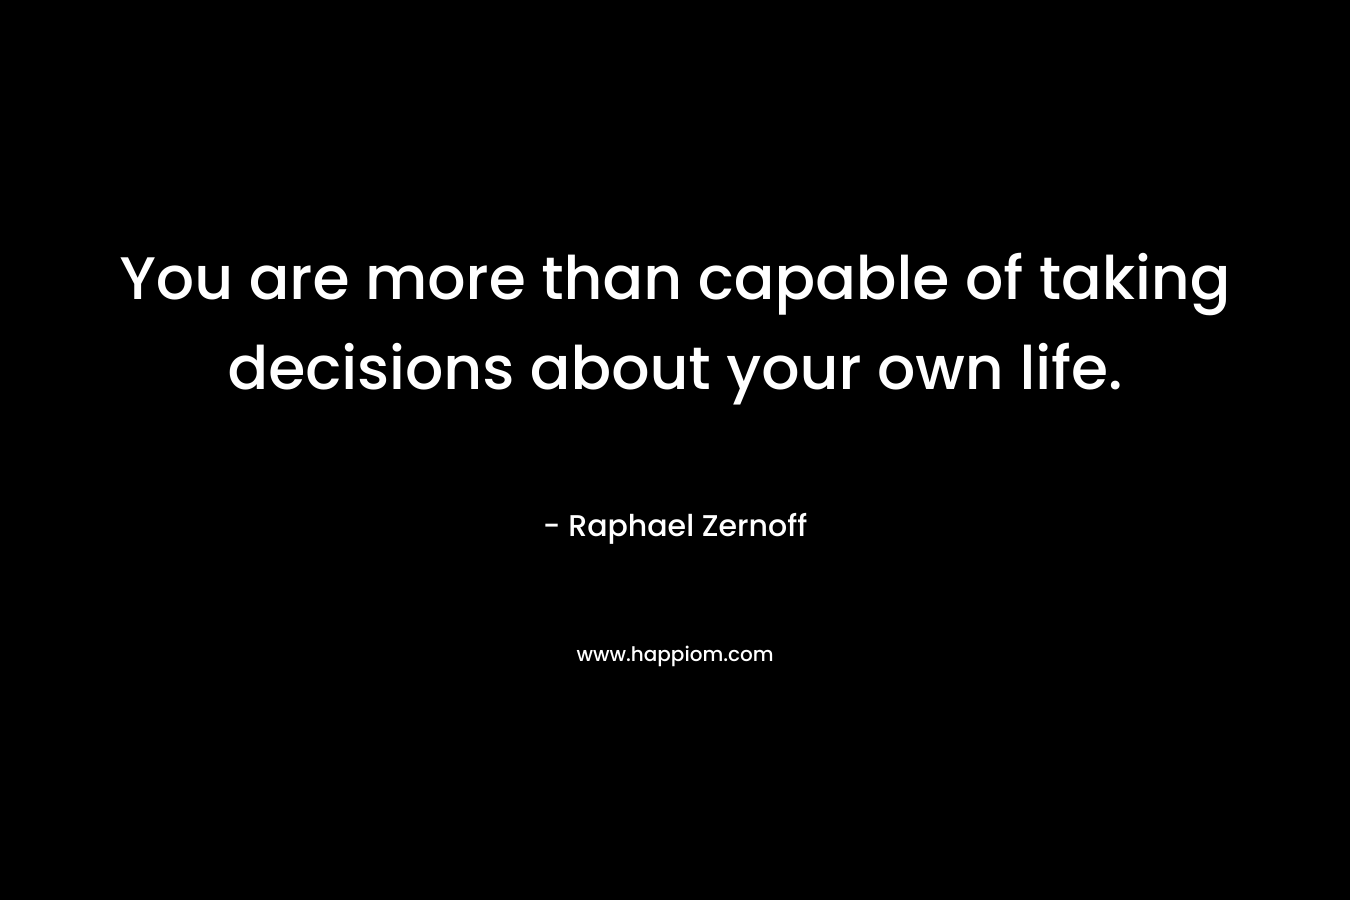 You are more than capable of taking decisions about your own life.